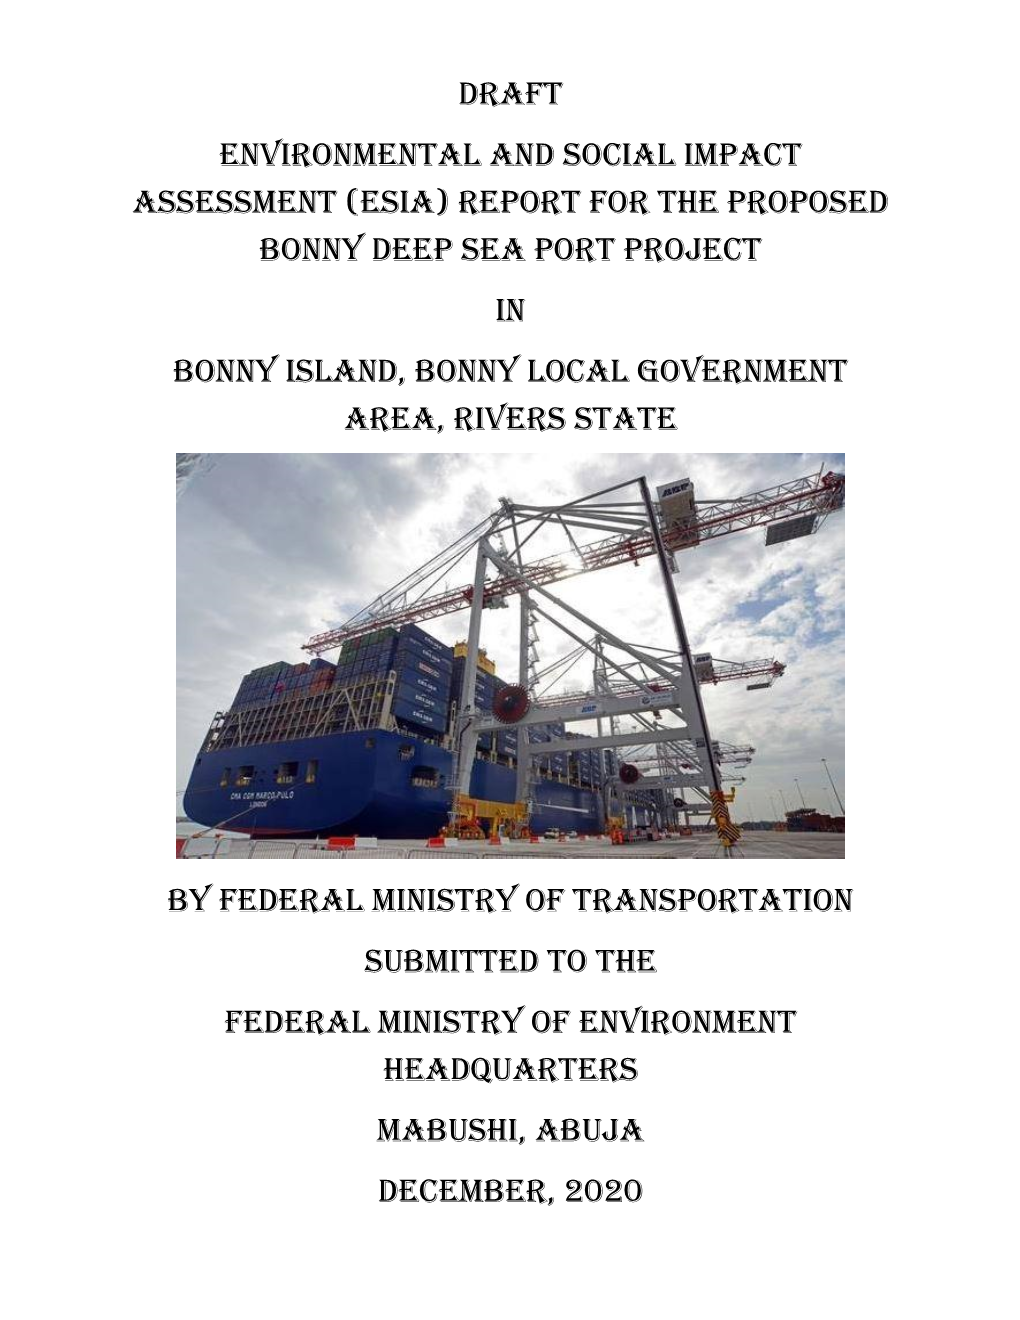 Draft Environmental and Social Impact Assessment (Esia) Report for the Proposed Bonny Deep Sea Port Project in Bonny Island